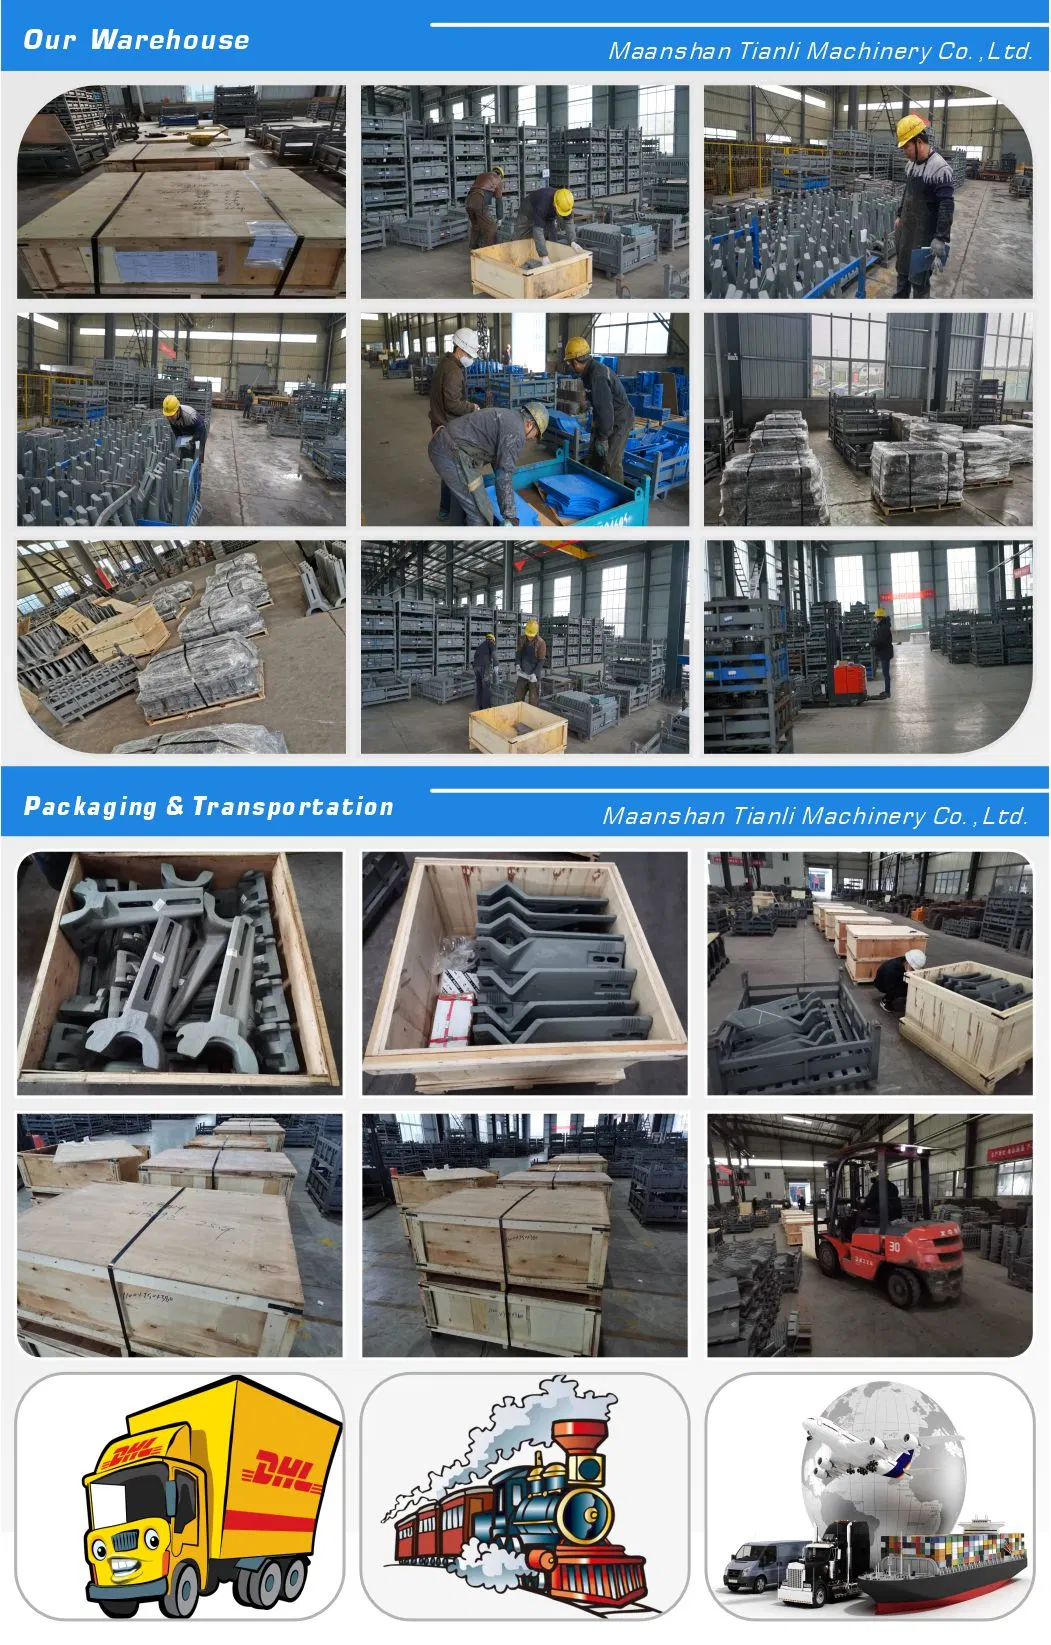 High Manganese Steel Casting Wear Parts for Hammer Mill